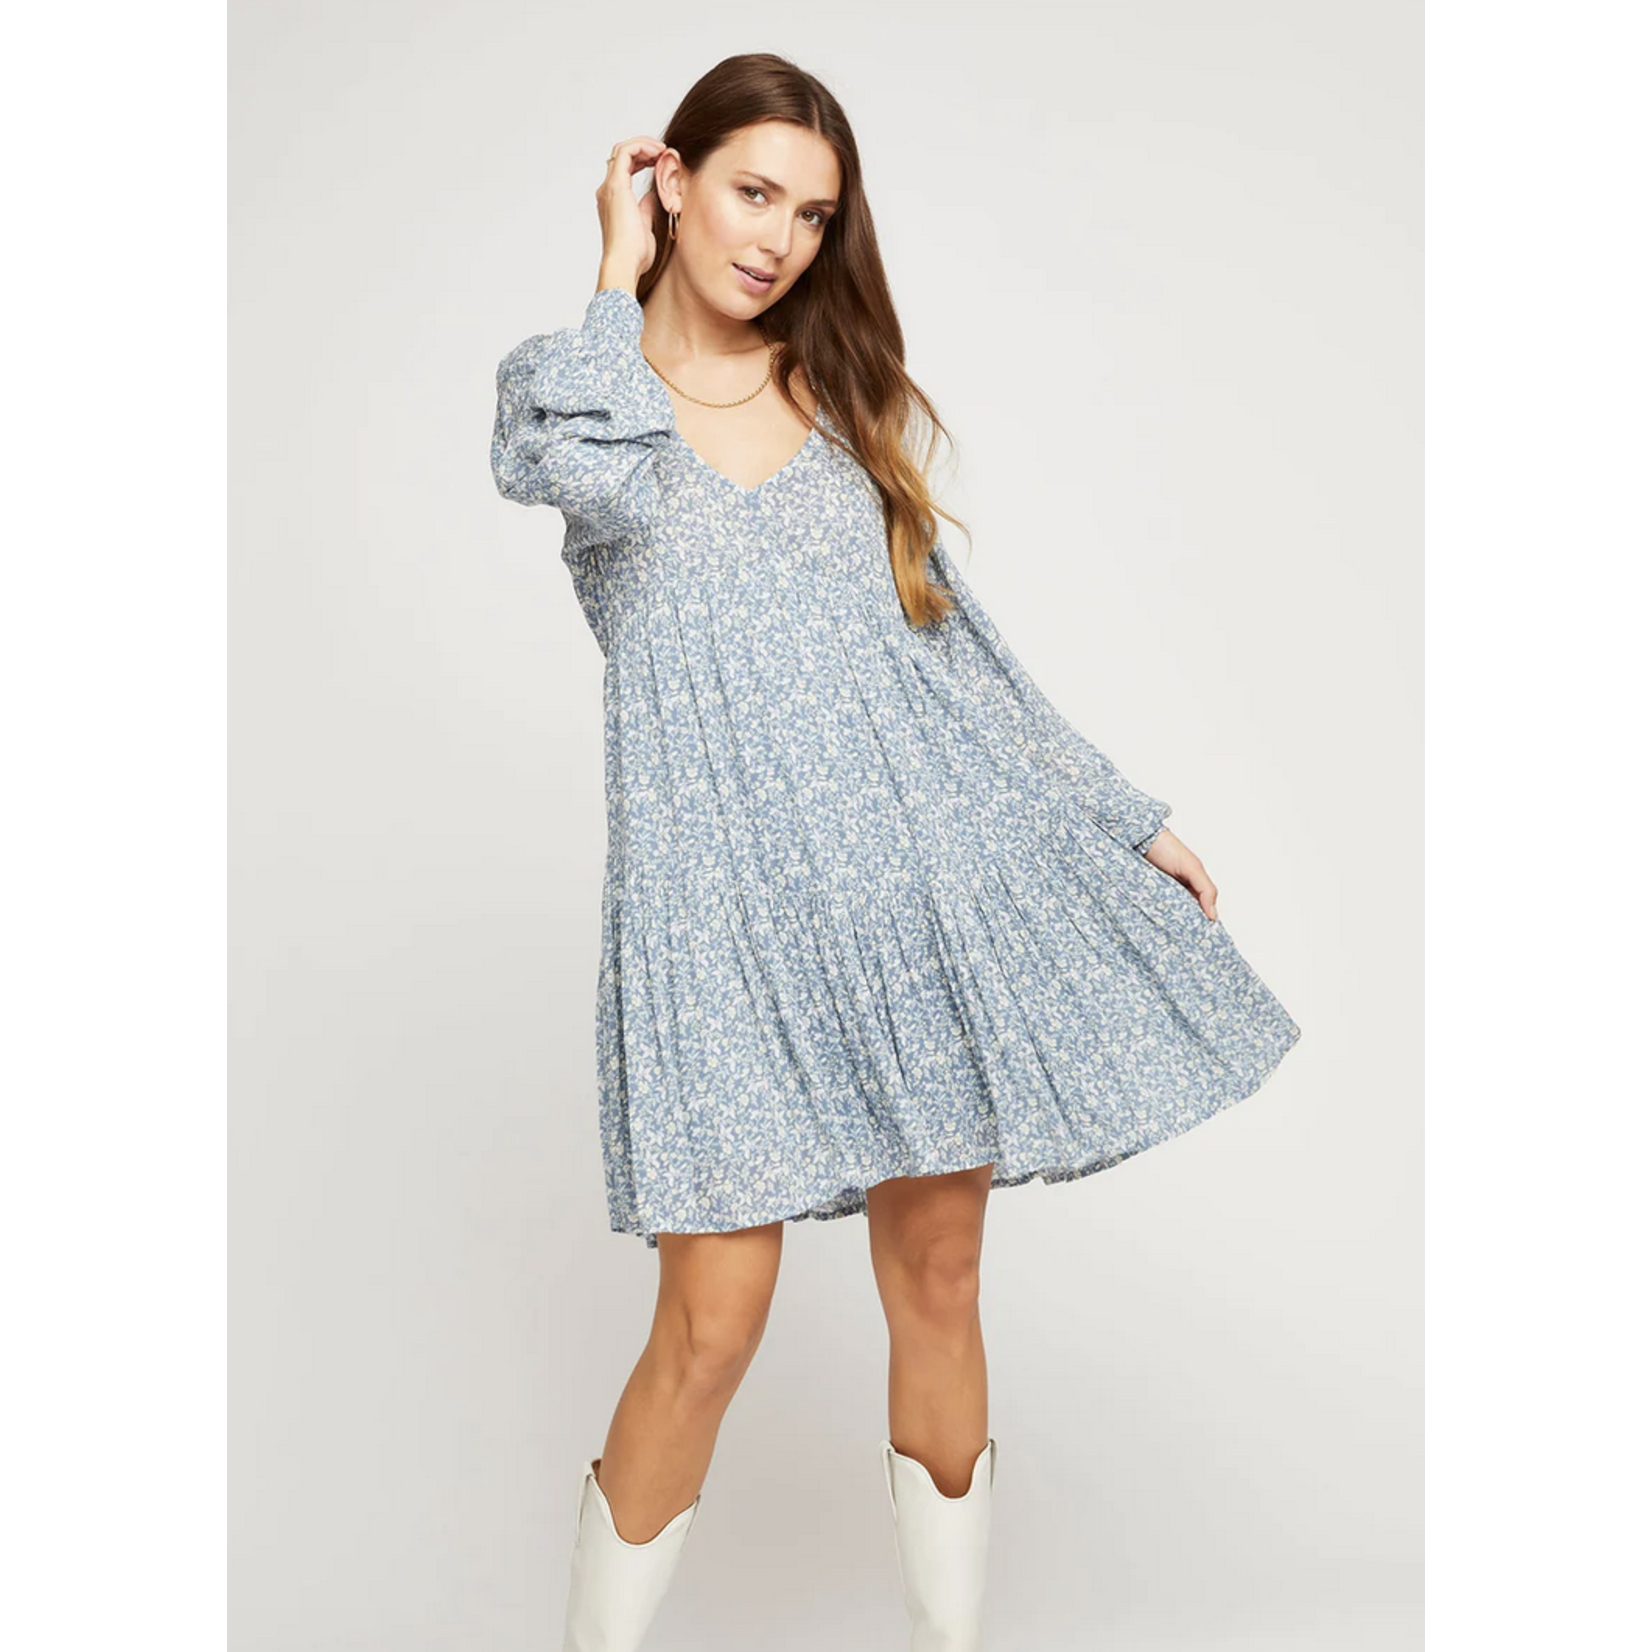 Gentle Fawn - Charlize dress